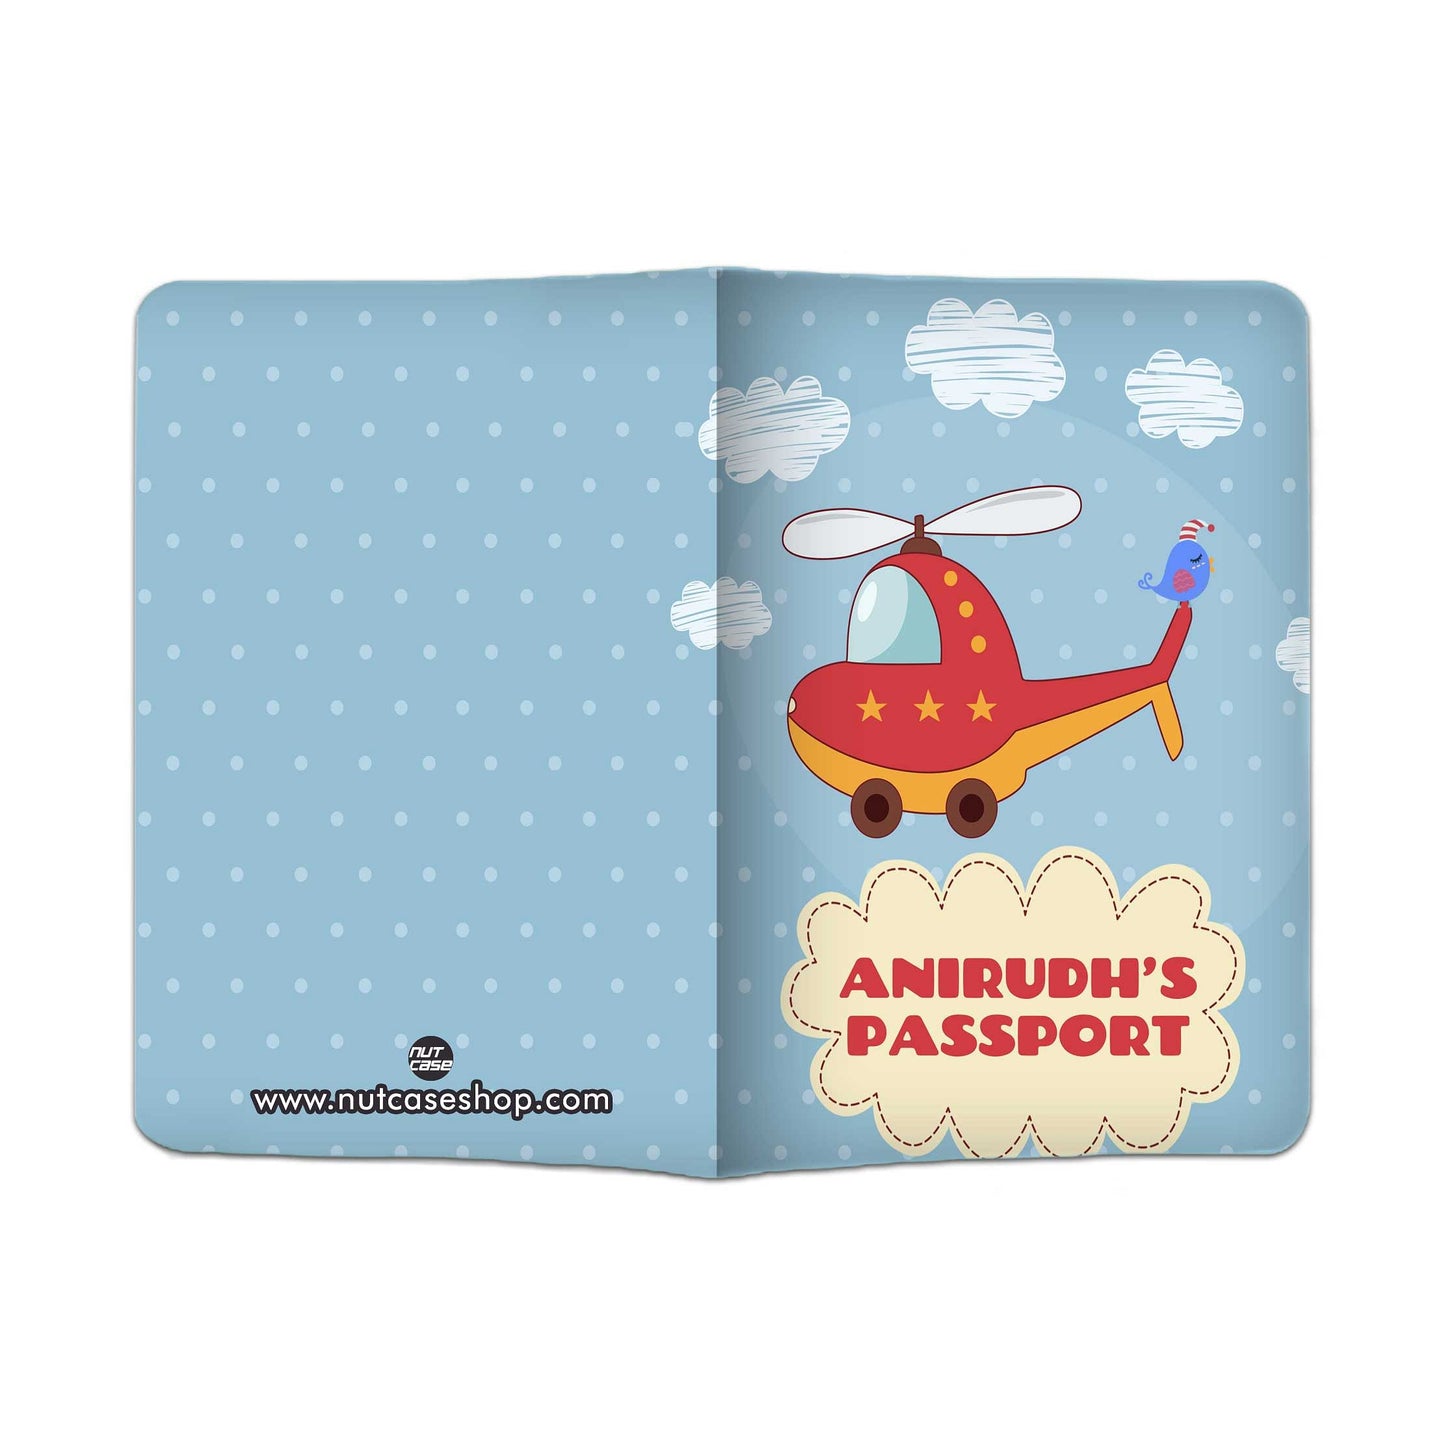 Customized Passport Cover for Kids  -Cute Helicopter Nutcase